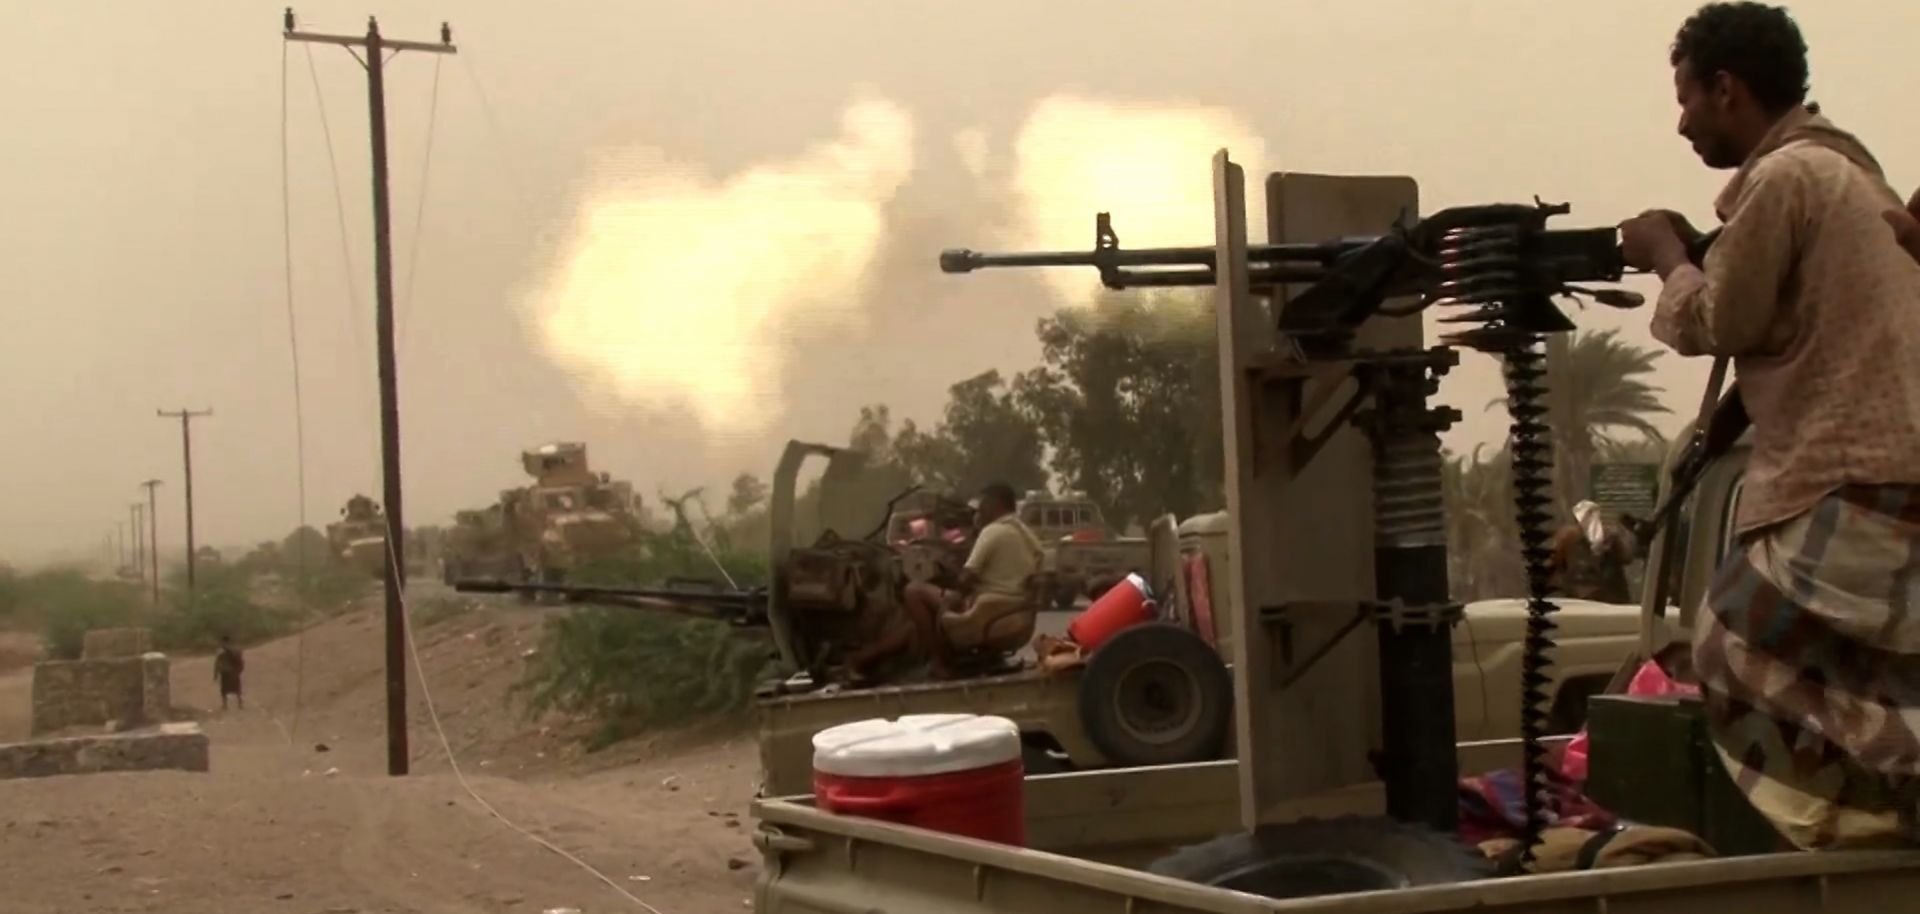  This photo shows a member of Yemen's pro-government forces firing a machine gun south of the airport near al-Hudaydah.